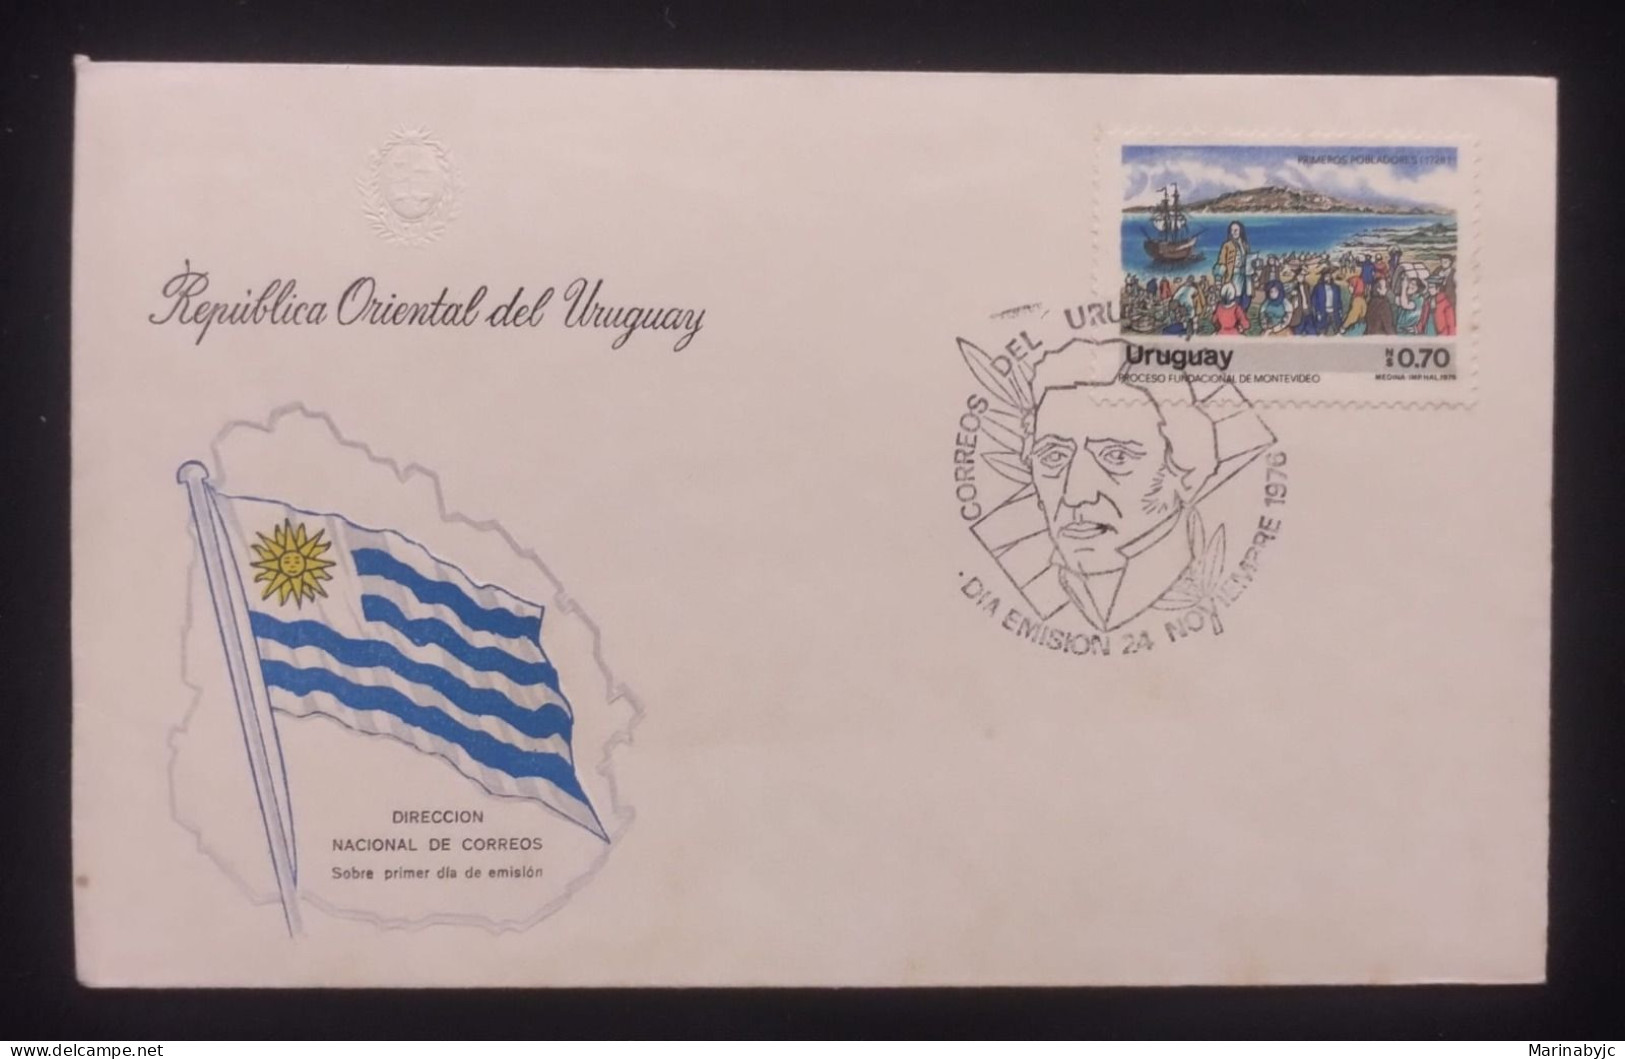 D)1976, URUGUAY, FIRST DAY COVER, ISSUE, 250TH ANNIVERSARY OF THE FOUNDATION OF MONTEVIDEO, THE FIRST SETTLER, FDC - Uruguay